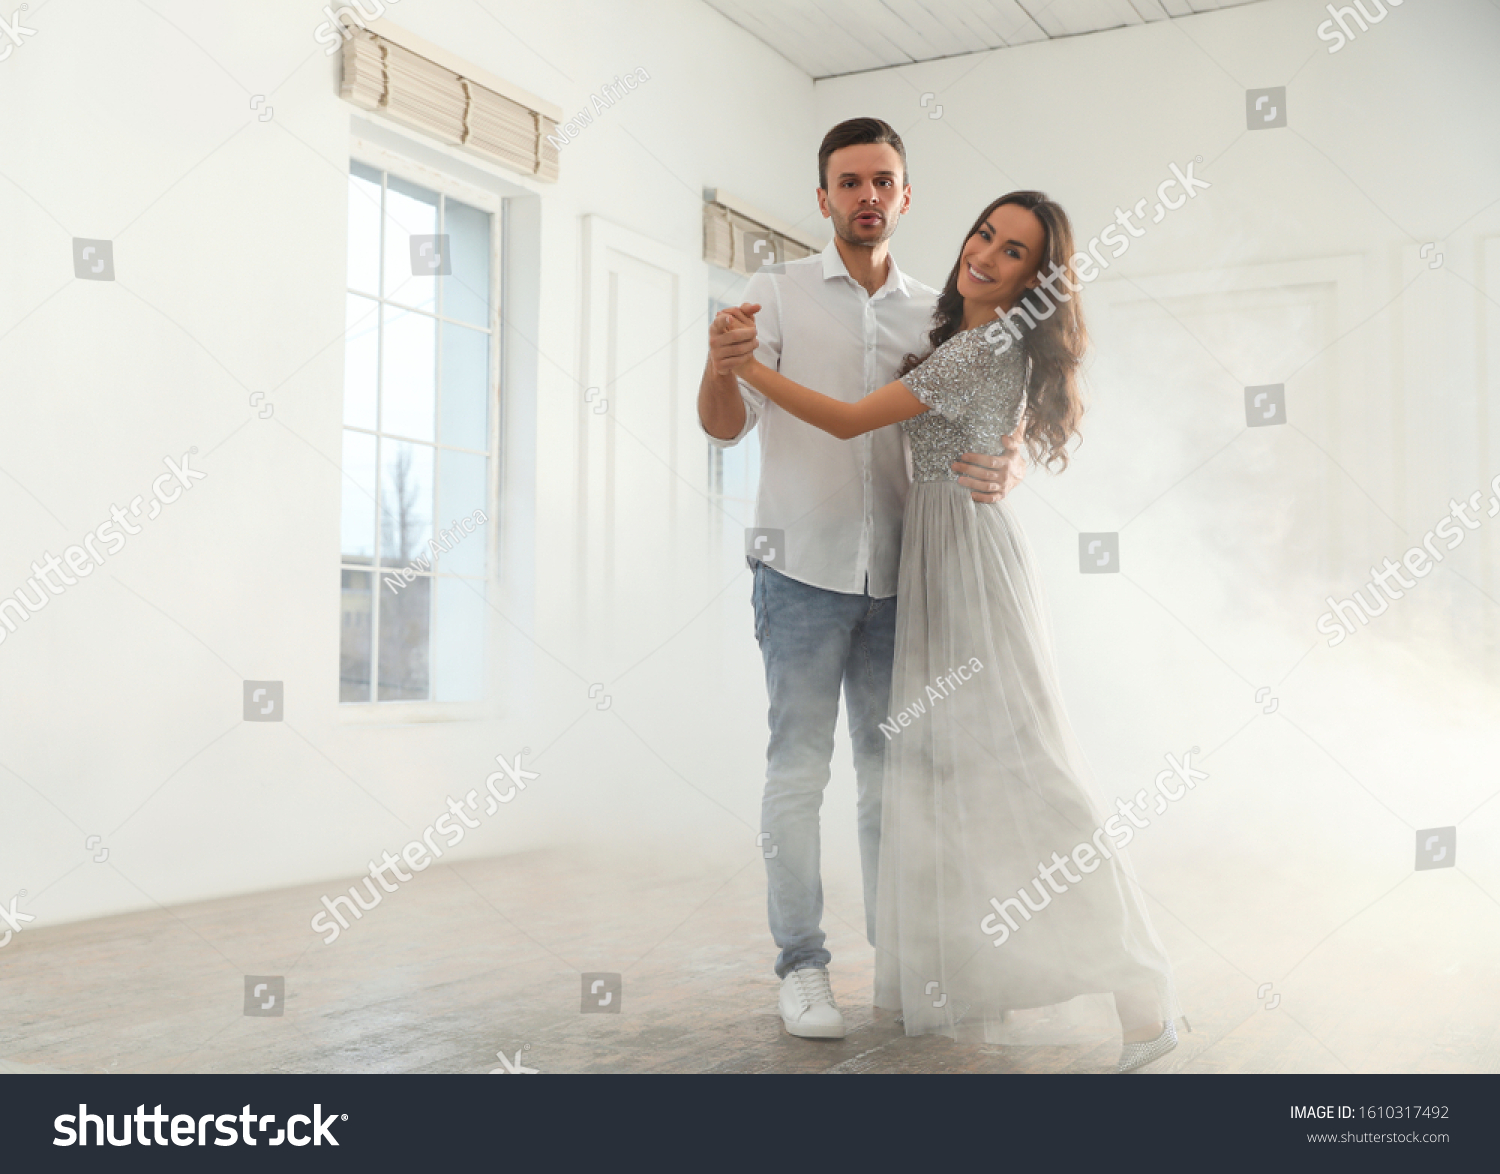 Lovely young couple dancing together in ballroom. Space for text #1610317492